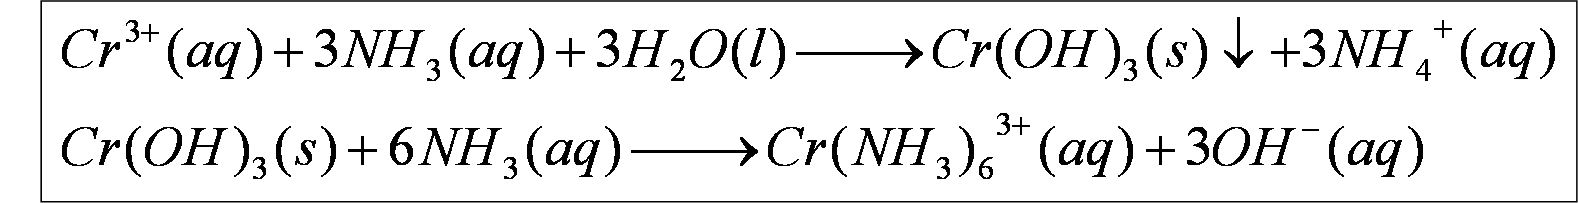 What is the formula for chromium (III) nitrate?